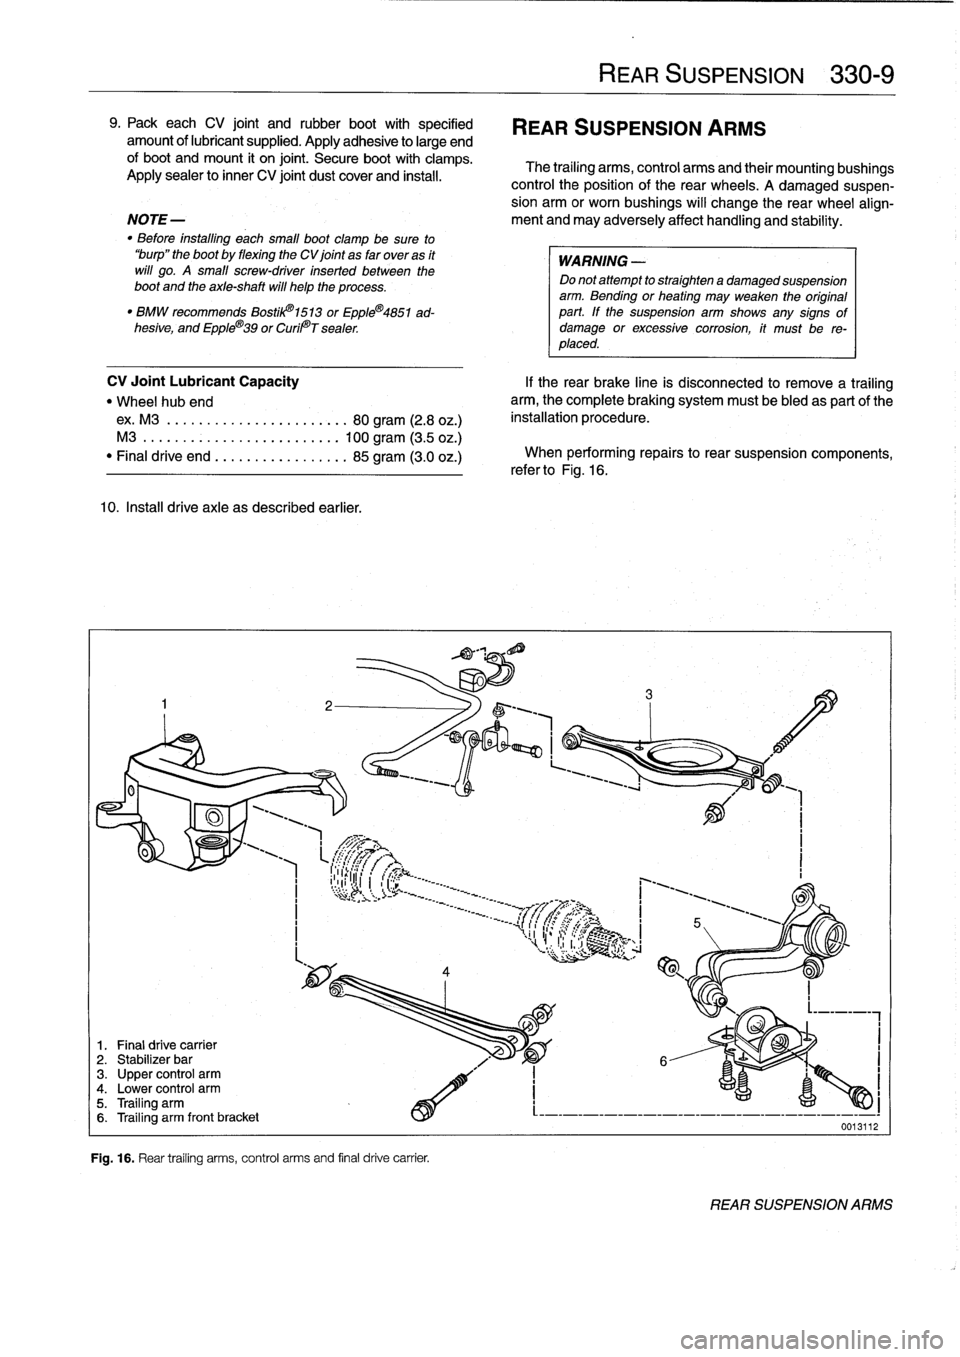 BMW M3 1993 E36 Owners Guide 9
.
Packeach
CV
joint
and
rubber
boot
with
specified

	

REAR
SUSPENSION
ARMS
amount
of
lubricant
supplied
.
Apply
adhesive
to
large
end
of
boot
and
mount
it
on
joint
.
Secure
boot
with
clamps
.

	

T